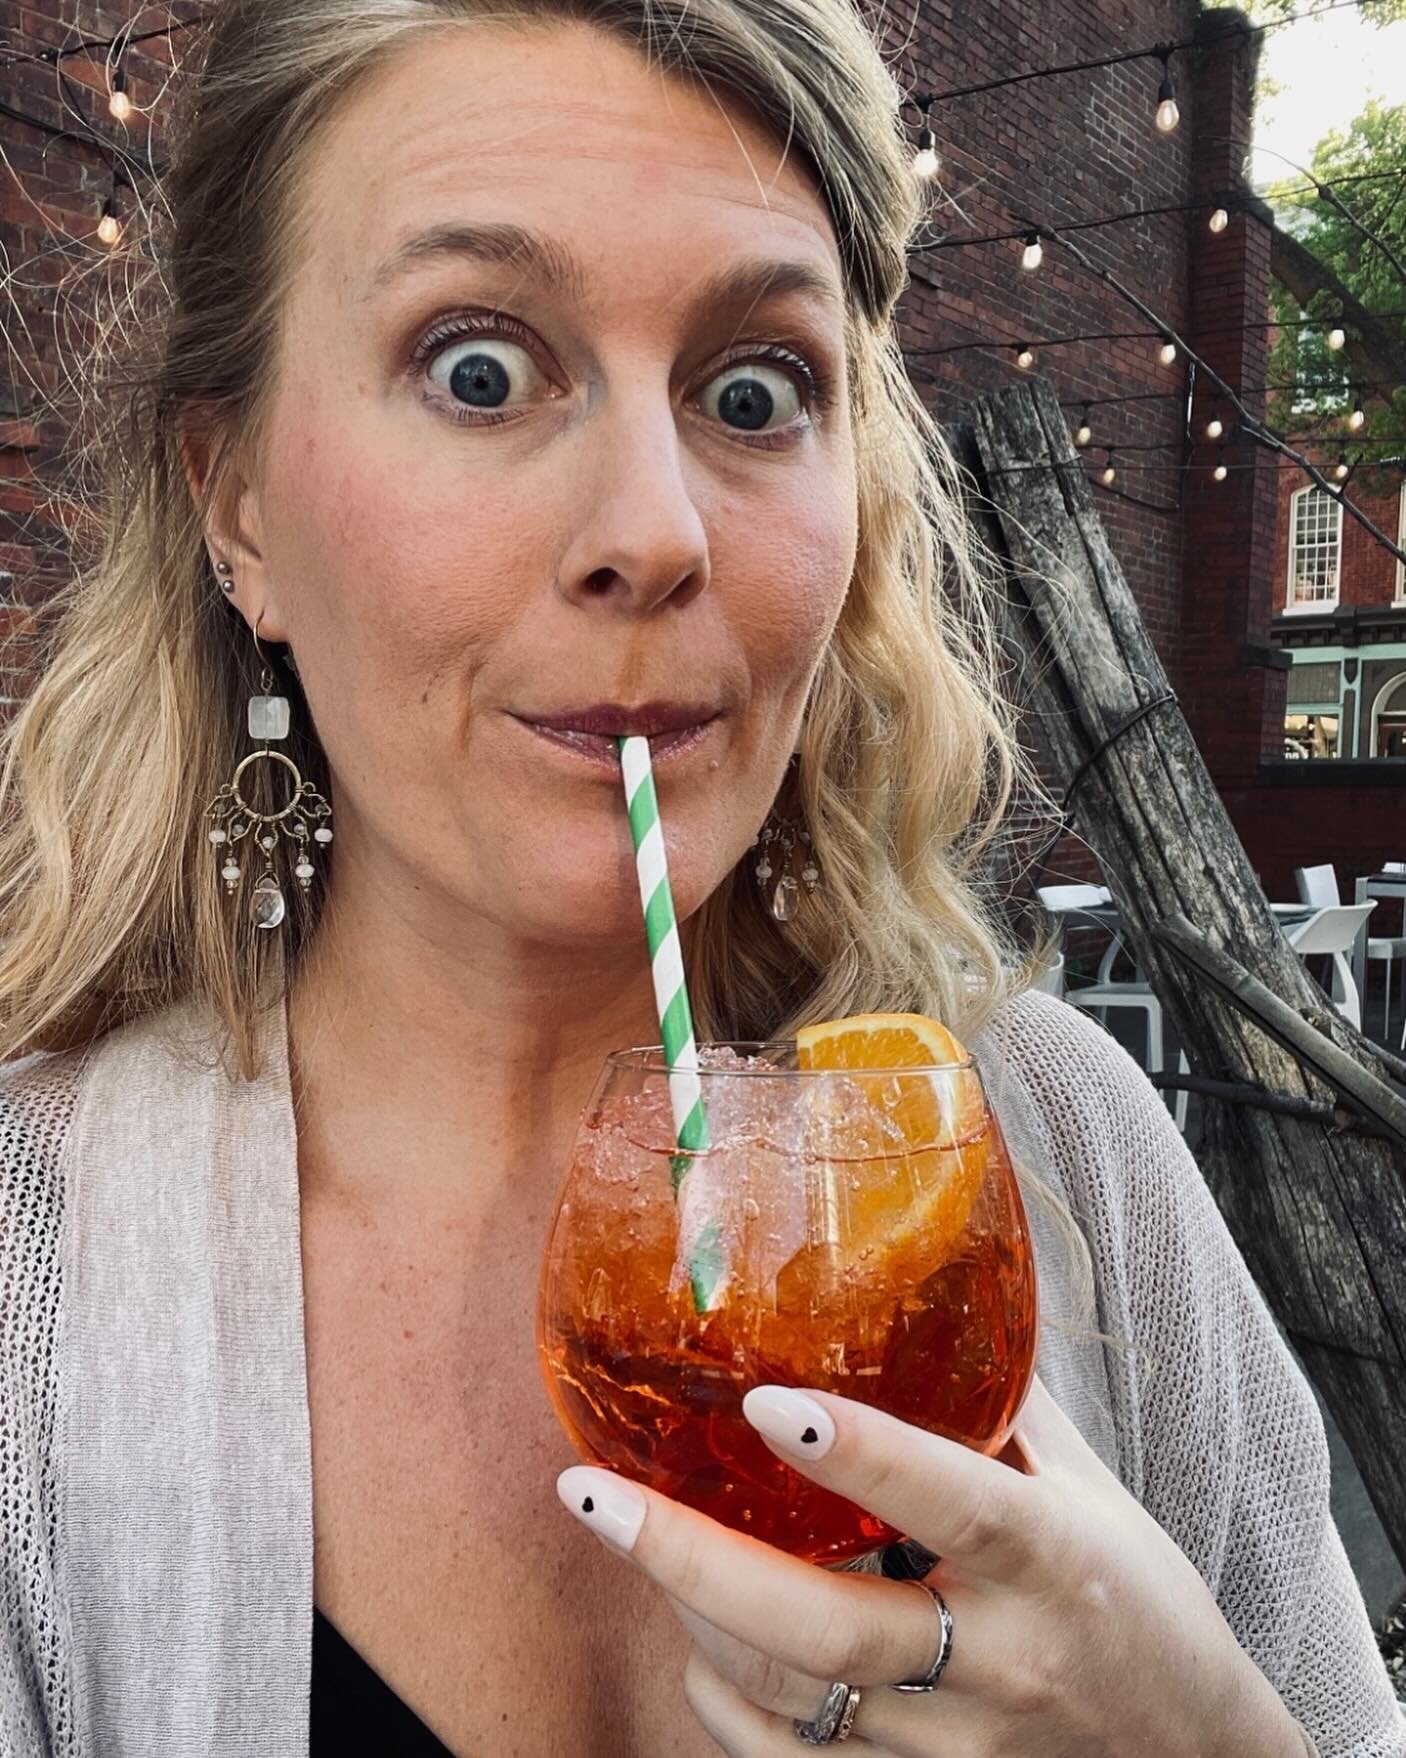 Had a great weekend up in Frederick but tragically forgot to get a photo with @byjennihowell so here&rsquo;s a wide-eyed, aperol spritz sipping photo of me all by my lonesome 🥂🍊 it was great having a few days just to celebrate with family, eat good